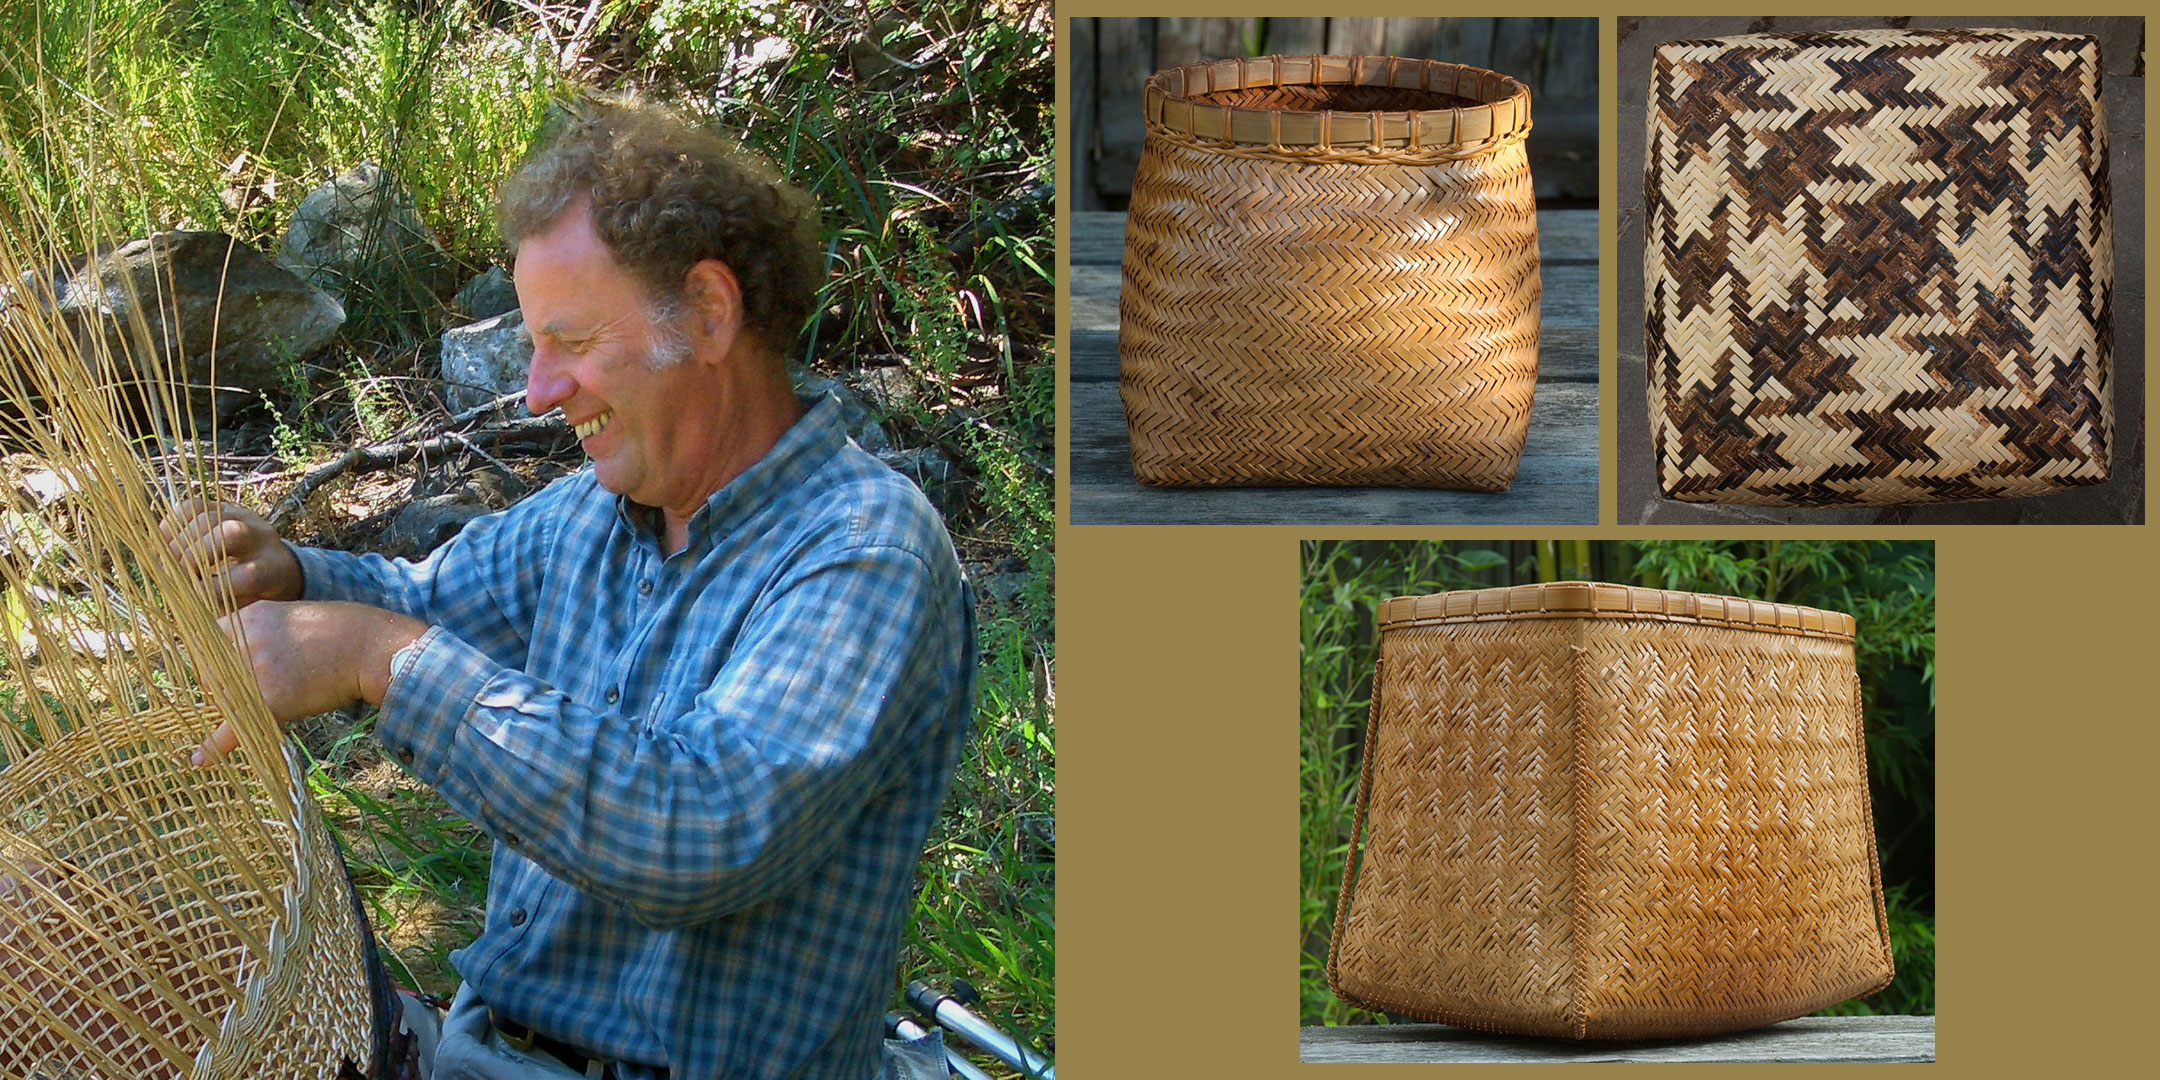 Twill basketry with Charlie Kennard